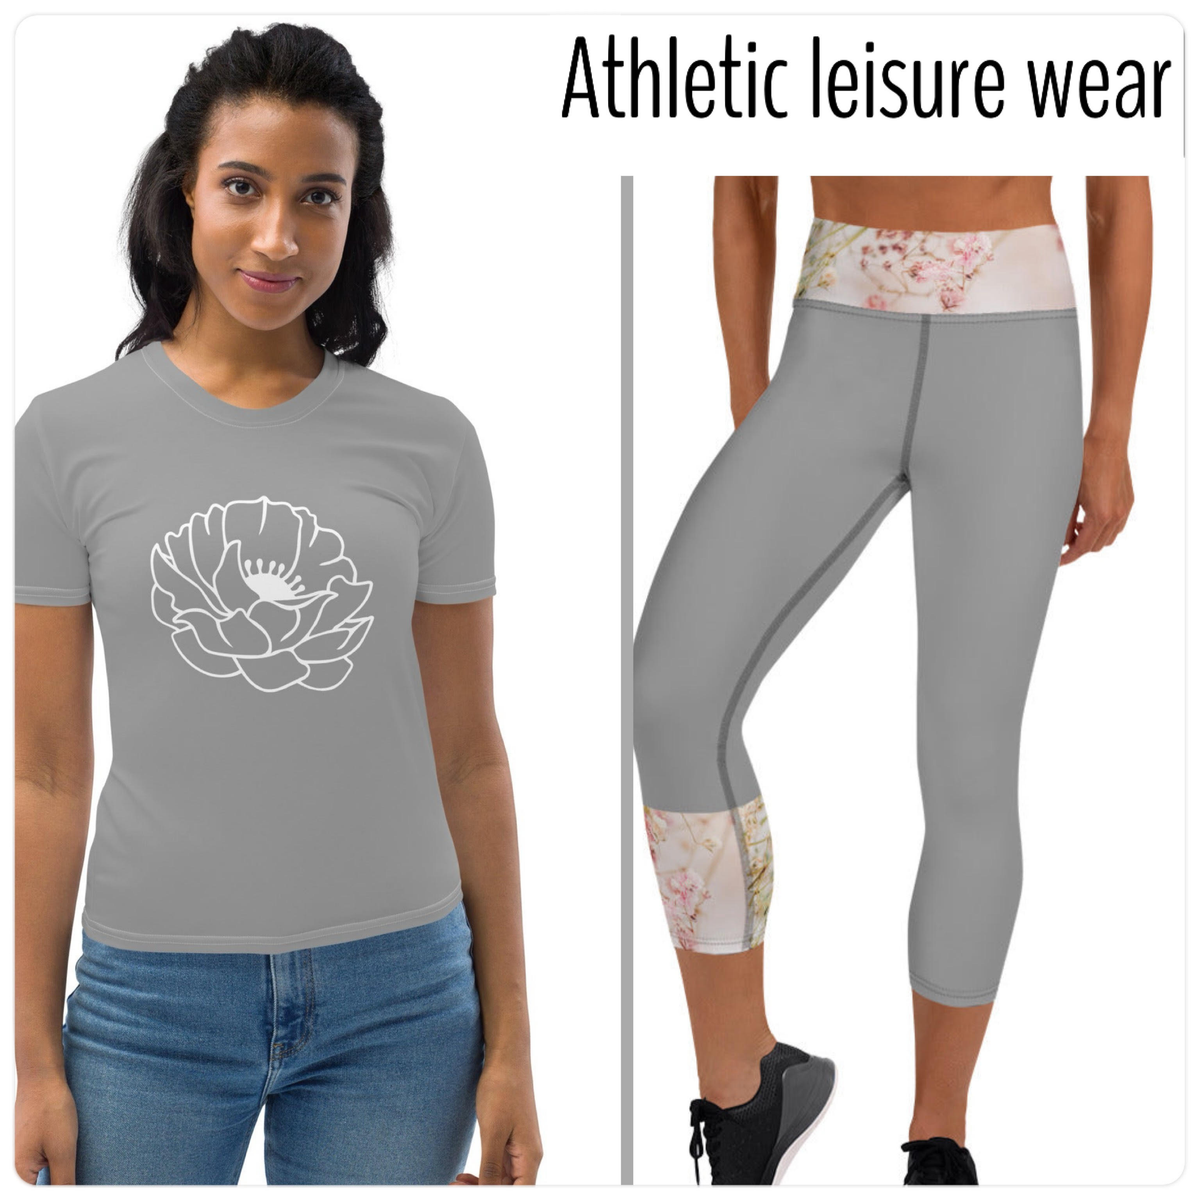 Exercise and leisure wear